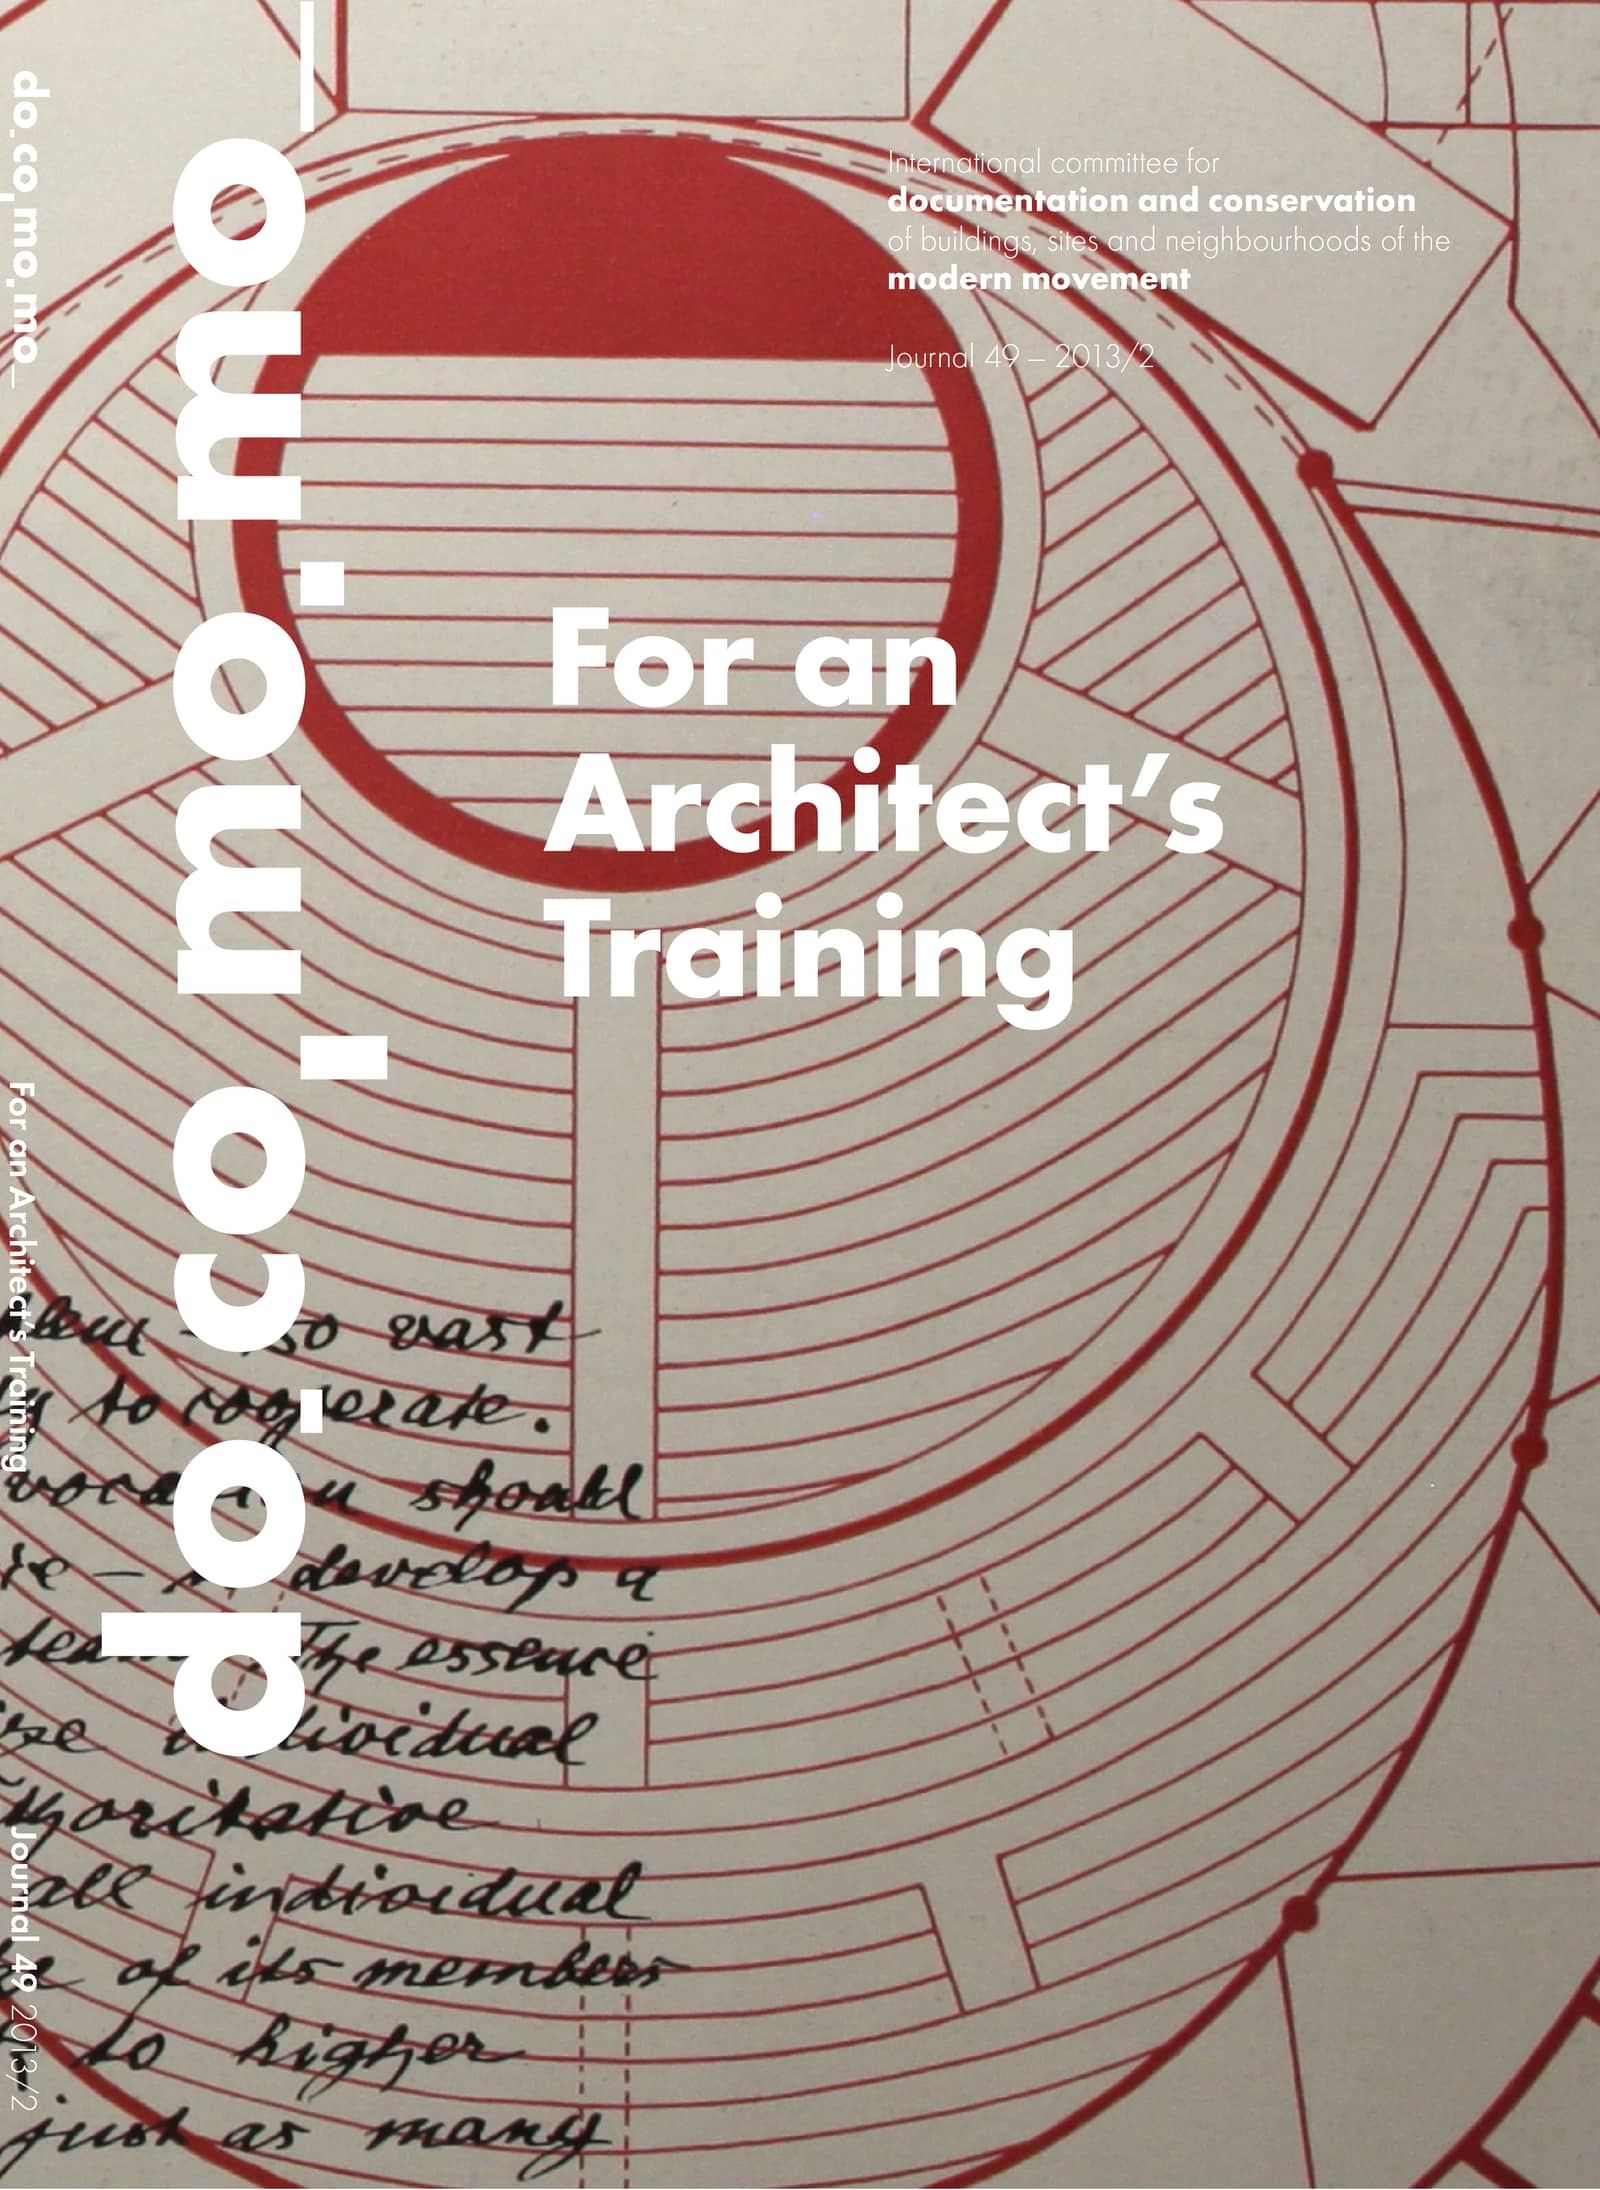 						View No. 49 (2013): For an Architect’s Training
					